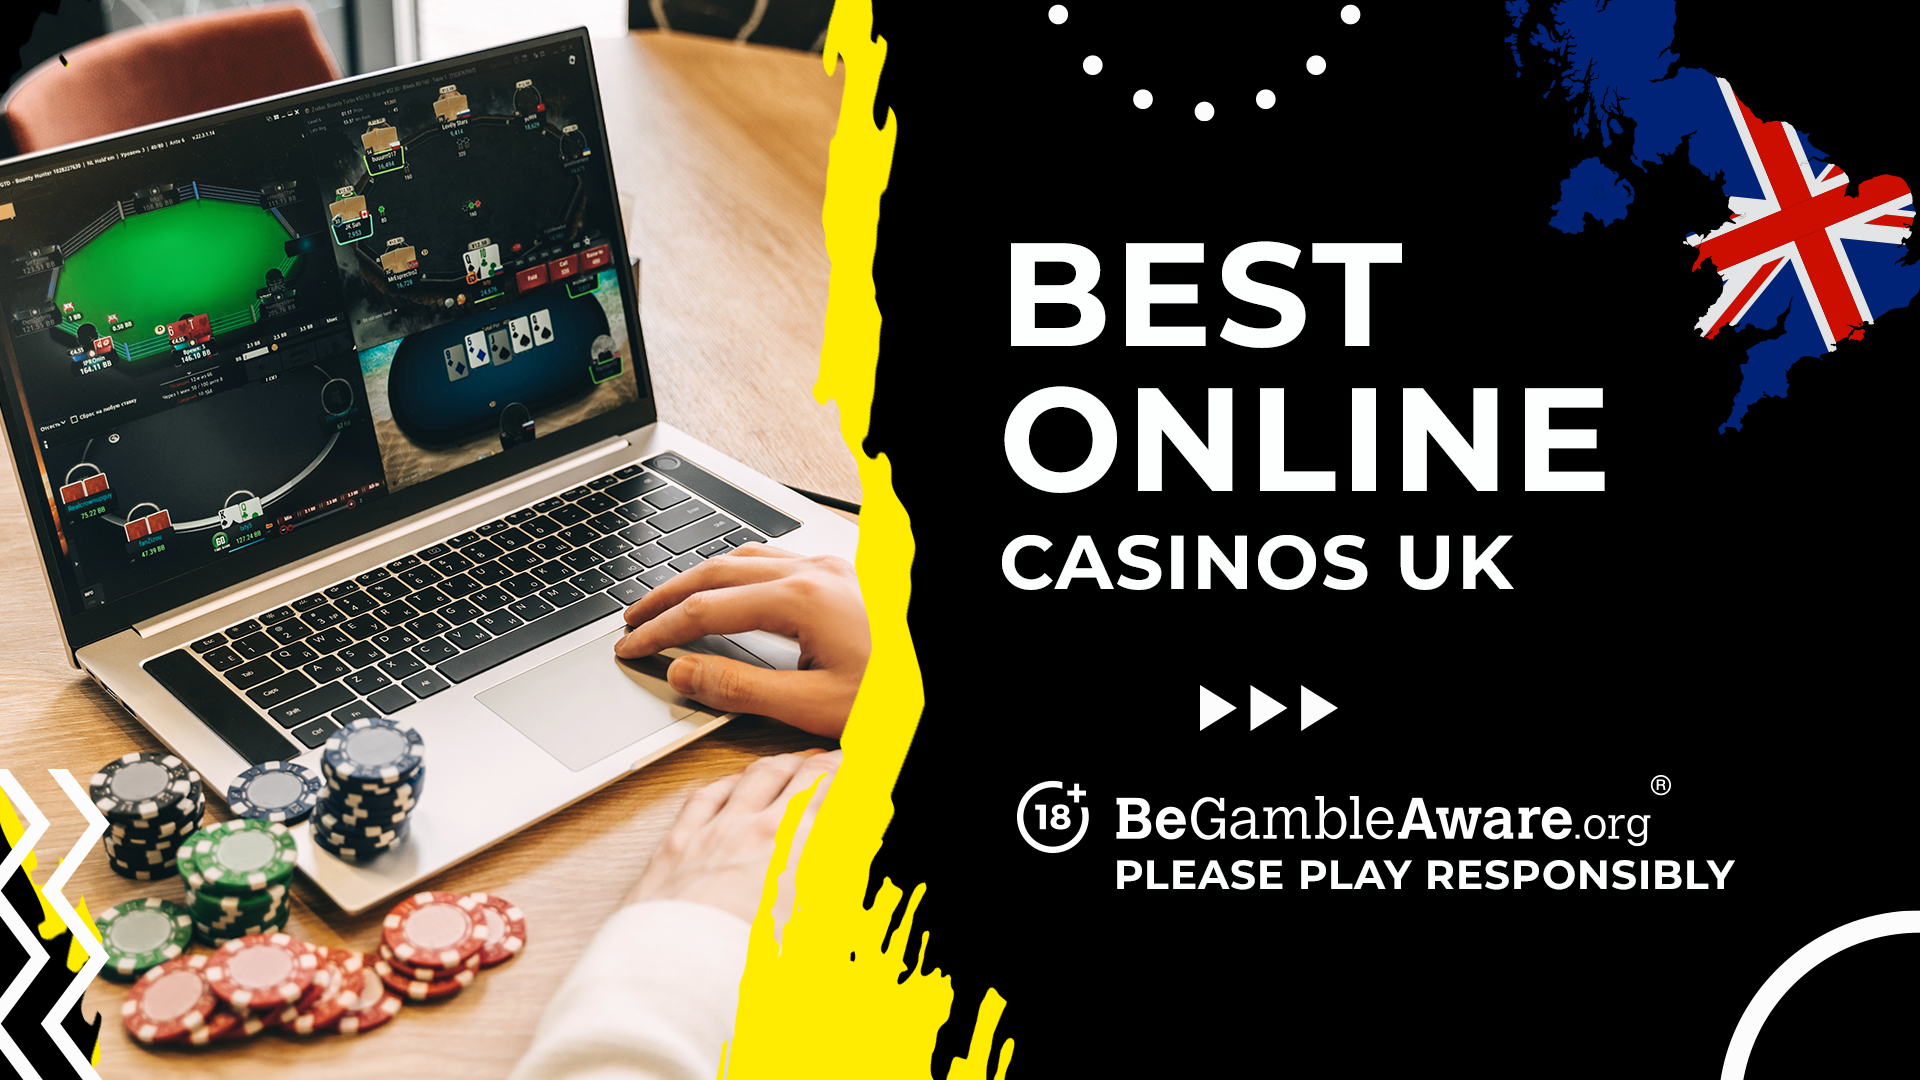 Online casino software development Reviewed: What Can One Learn From Other's Mistakes